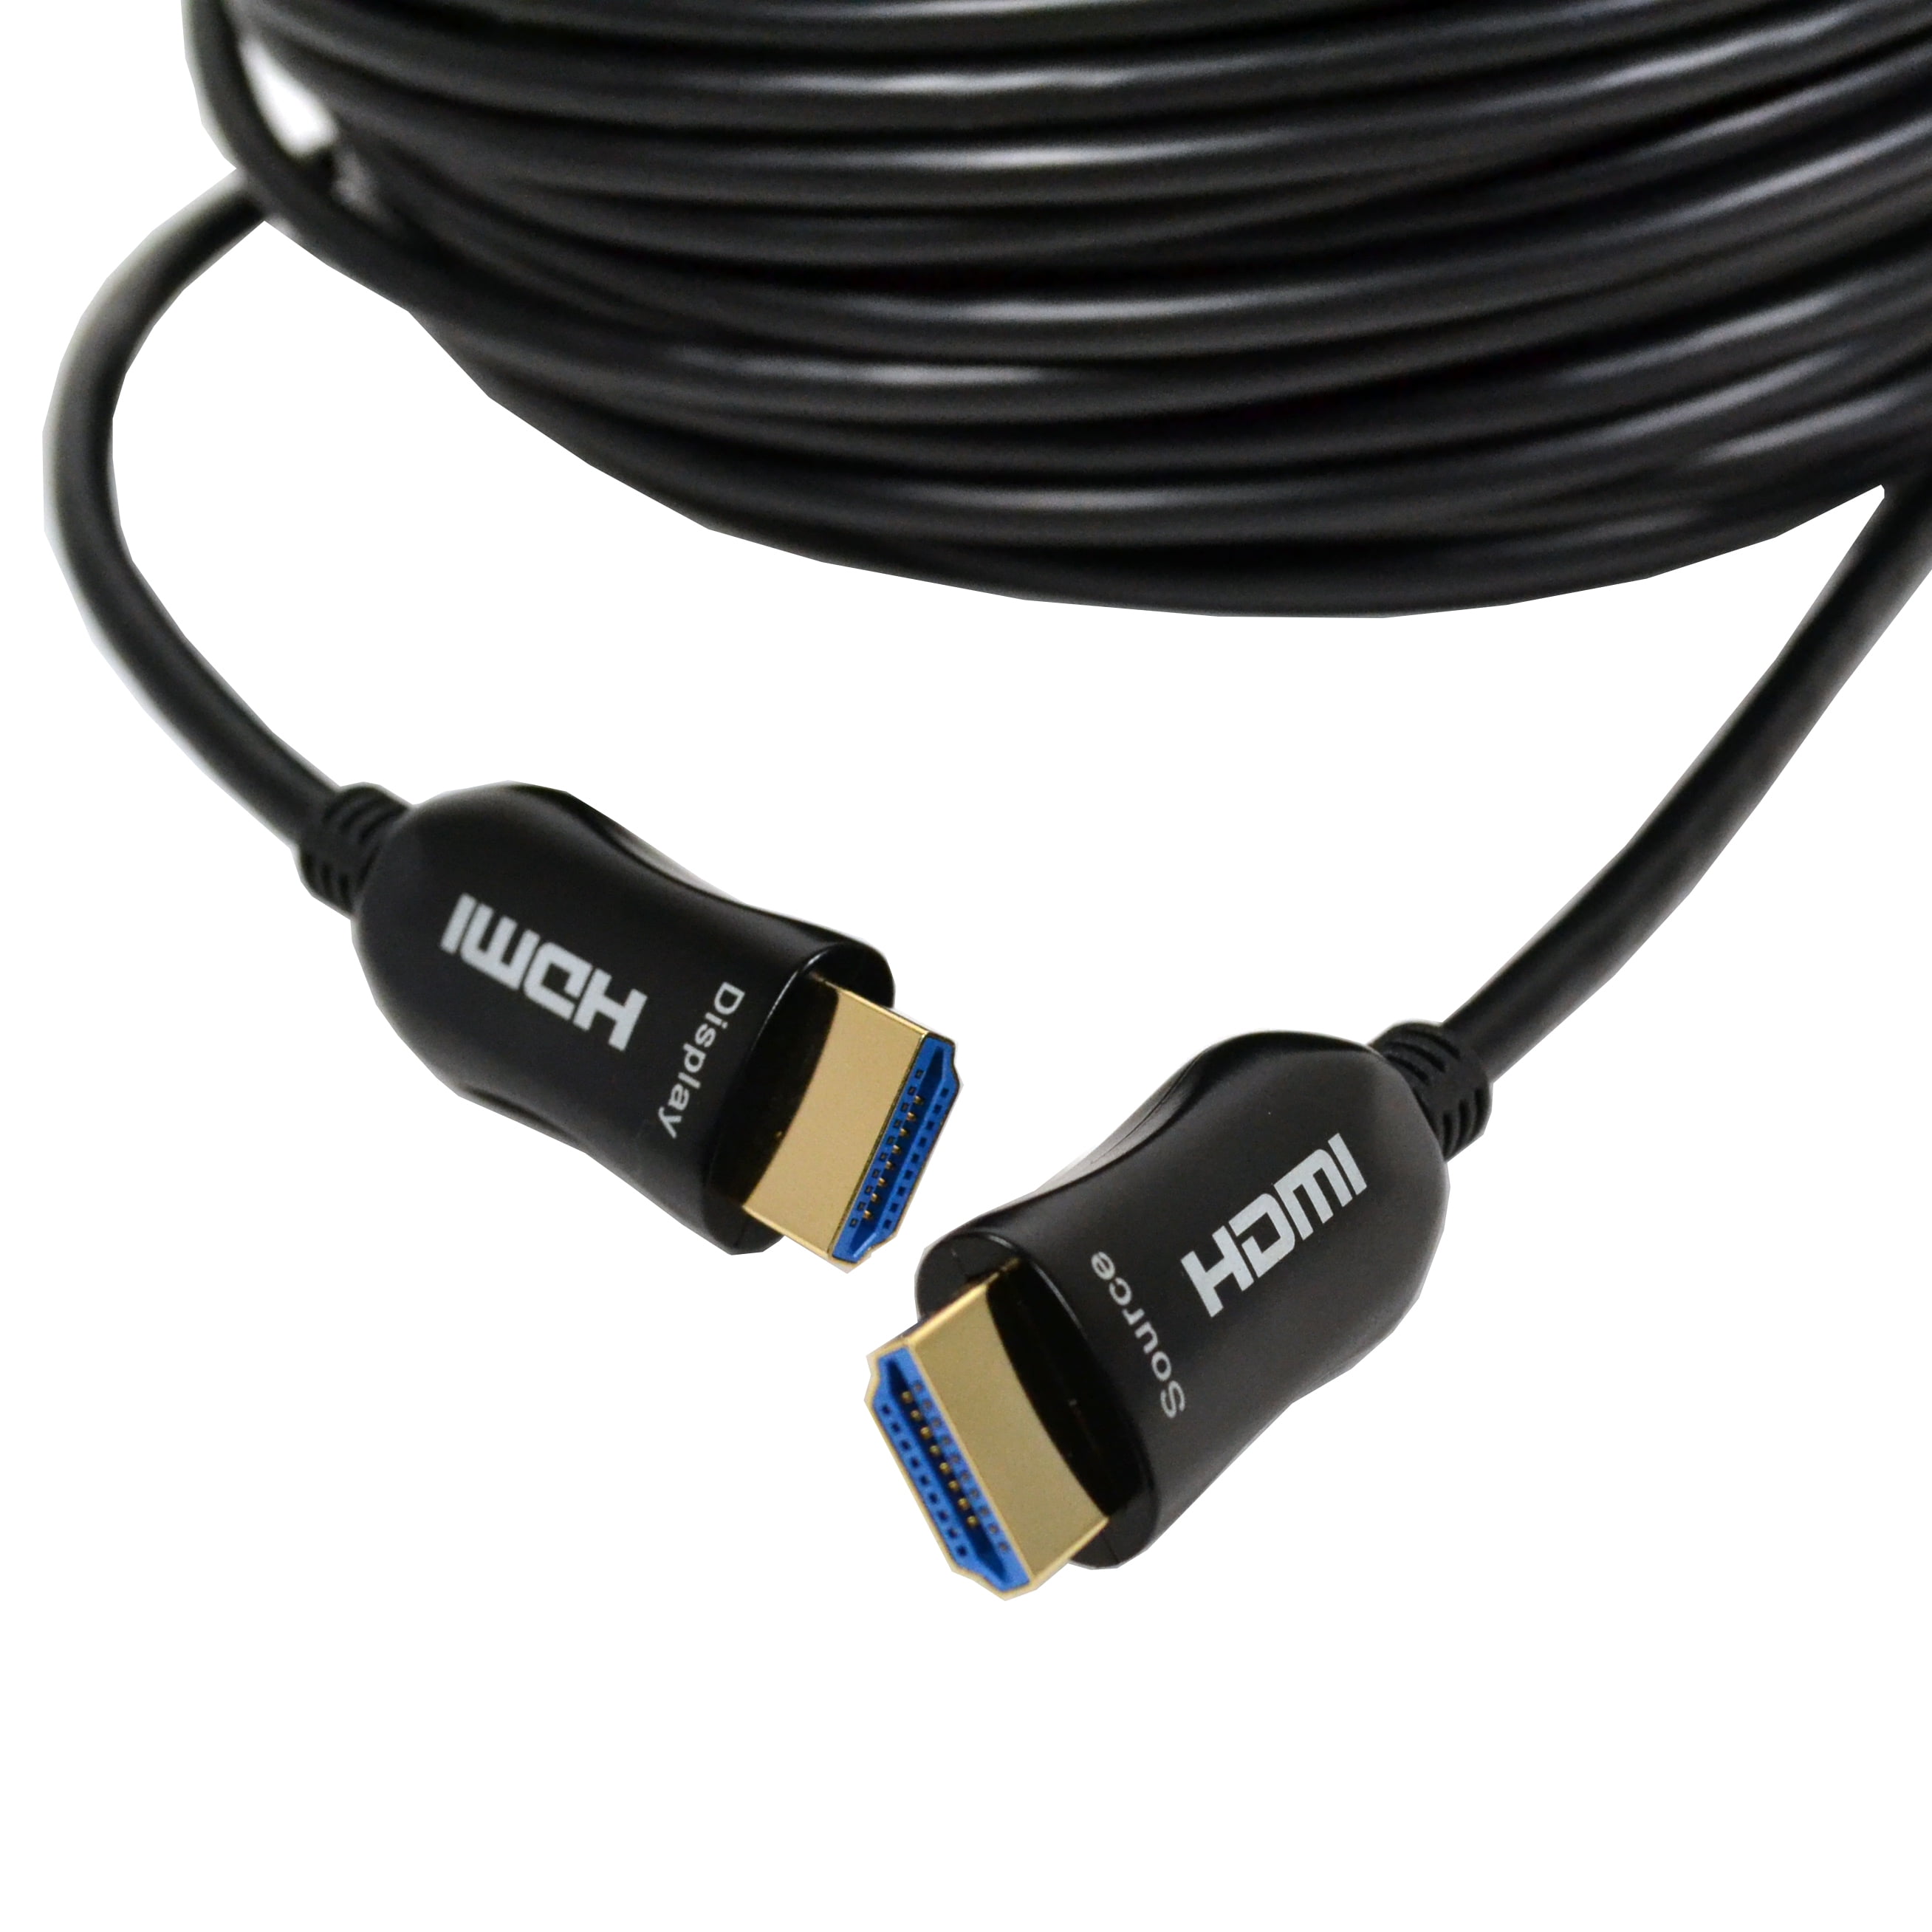 Logico FIBER OPTIC HDMI CABLE 4K – HDMI a/b Compliant, HDCP Super High-Speed, Ultra HD HDMI ARC cable with HDR. Perfect for HDTV/Projector/Home Theatre/Roku TV/Apple TV/Video Game Console -